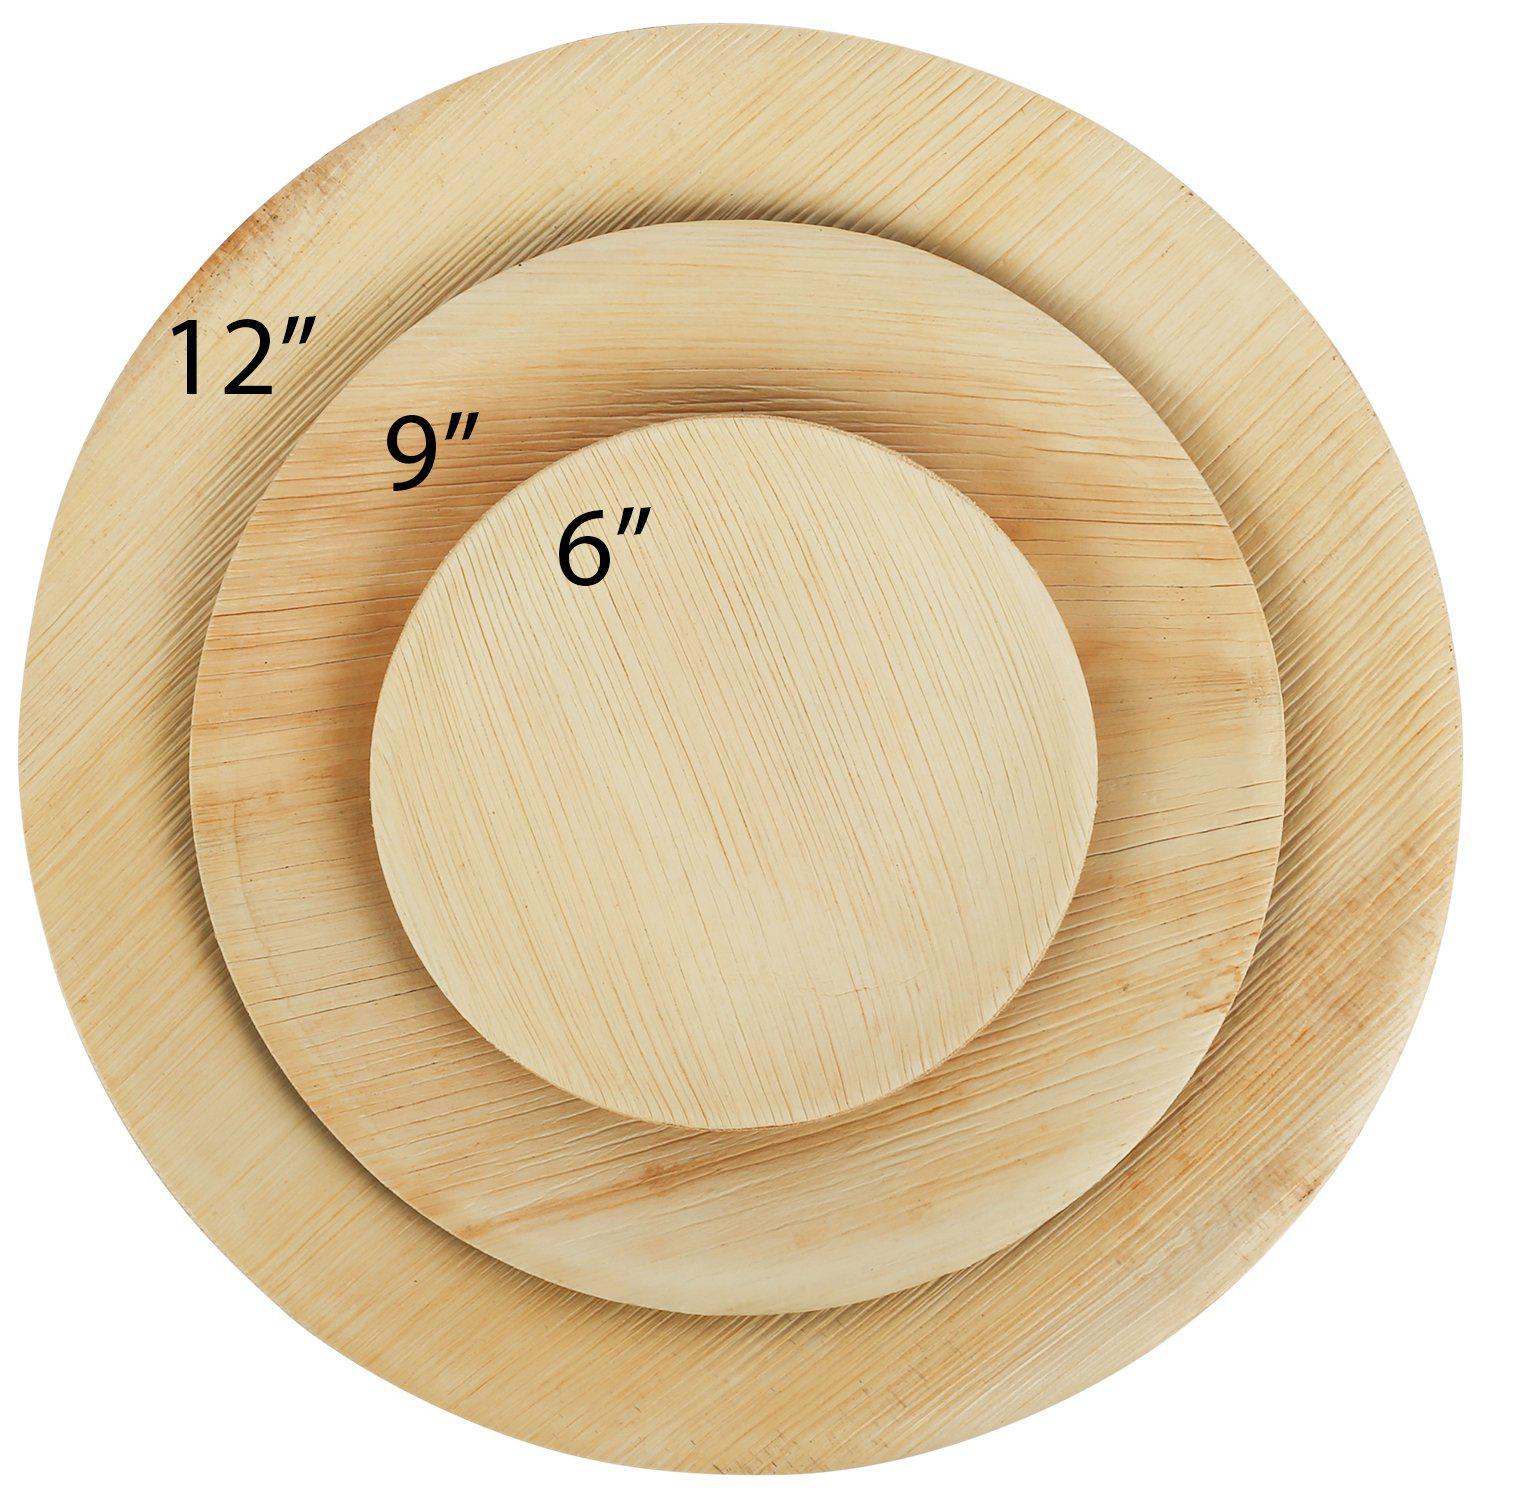 6" Round Small Plates - Pack of 25